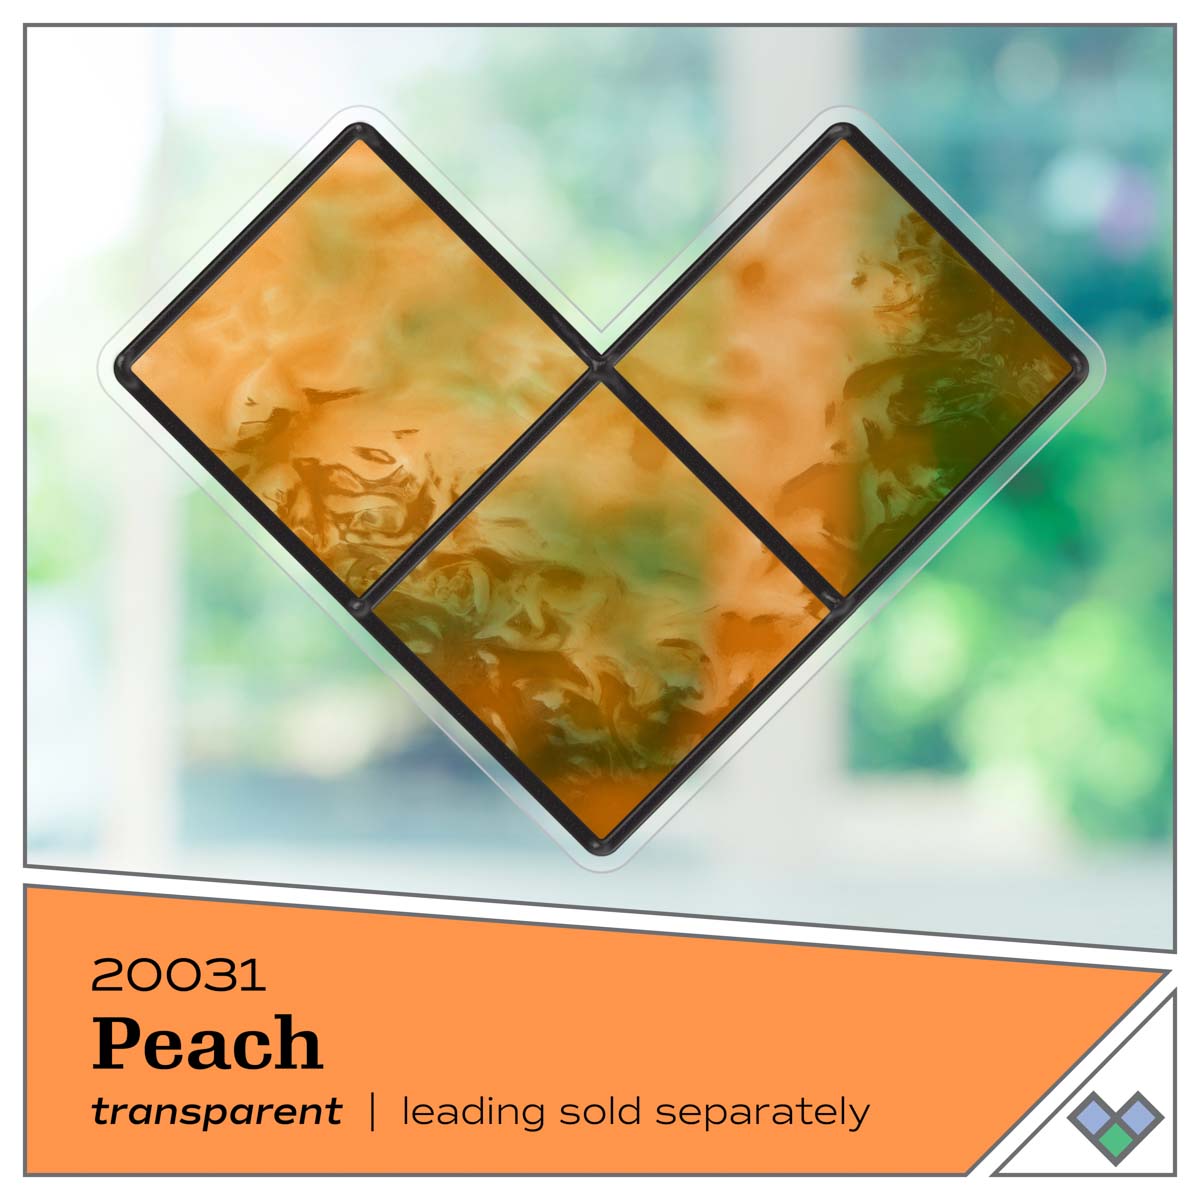 Gallery Glass ® Stained Glass Effect Paint - Peach, 2 oz. - 20031